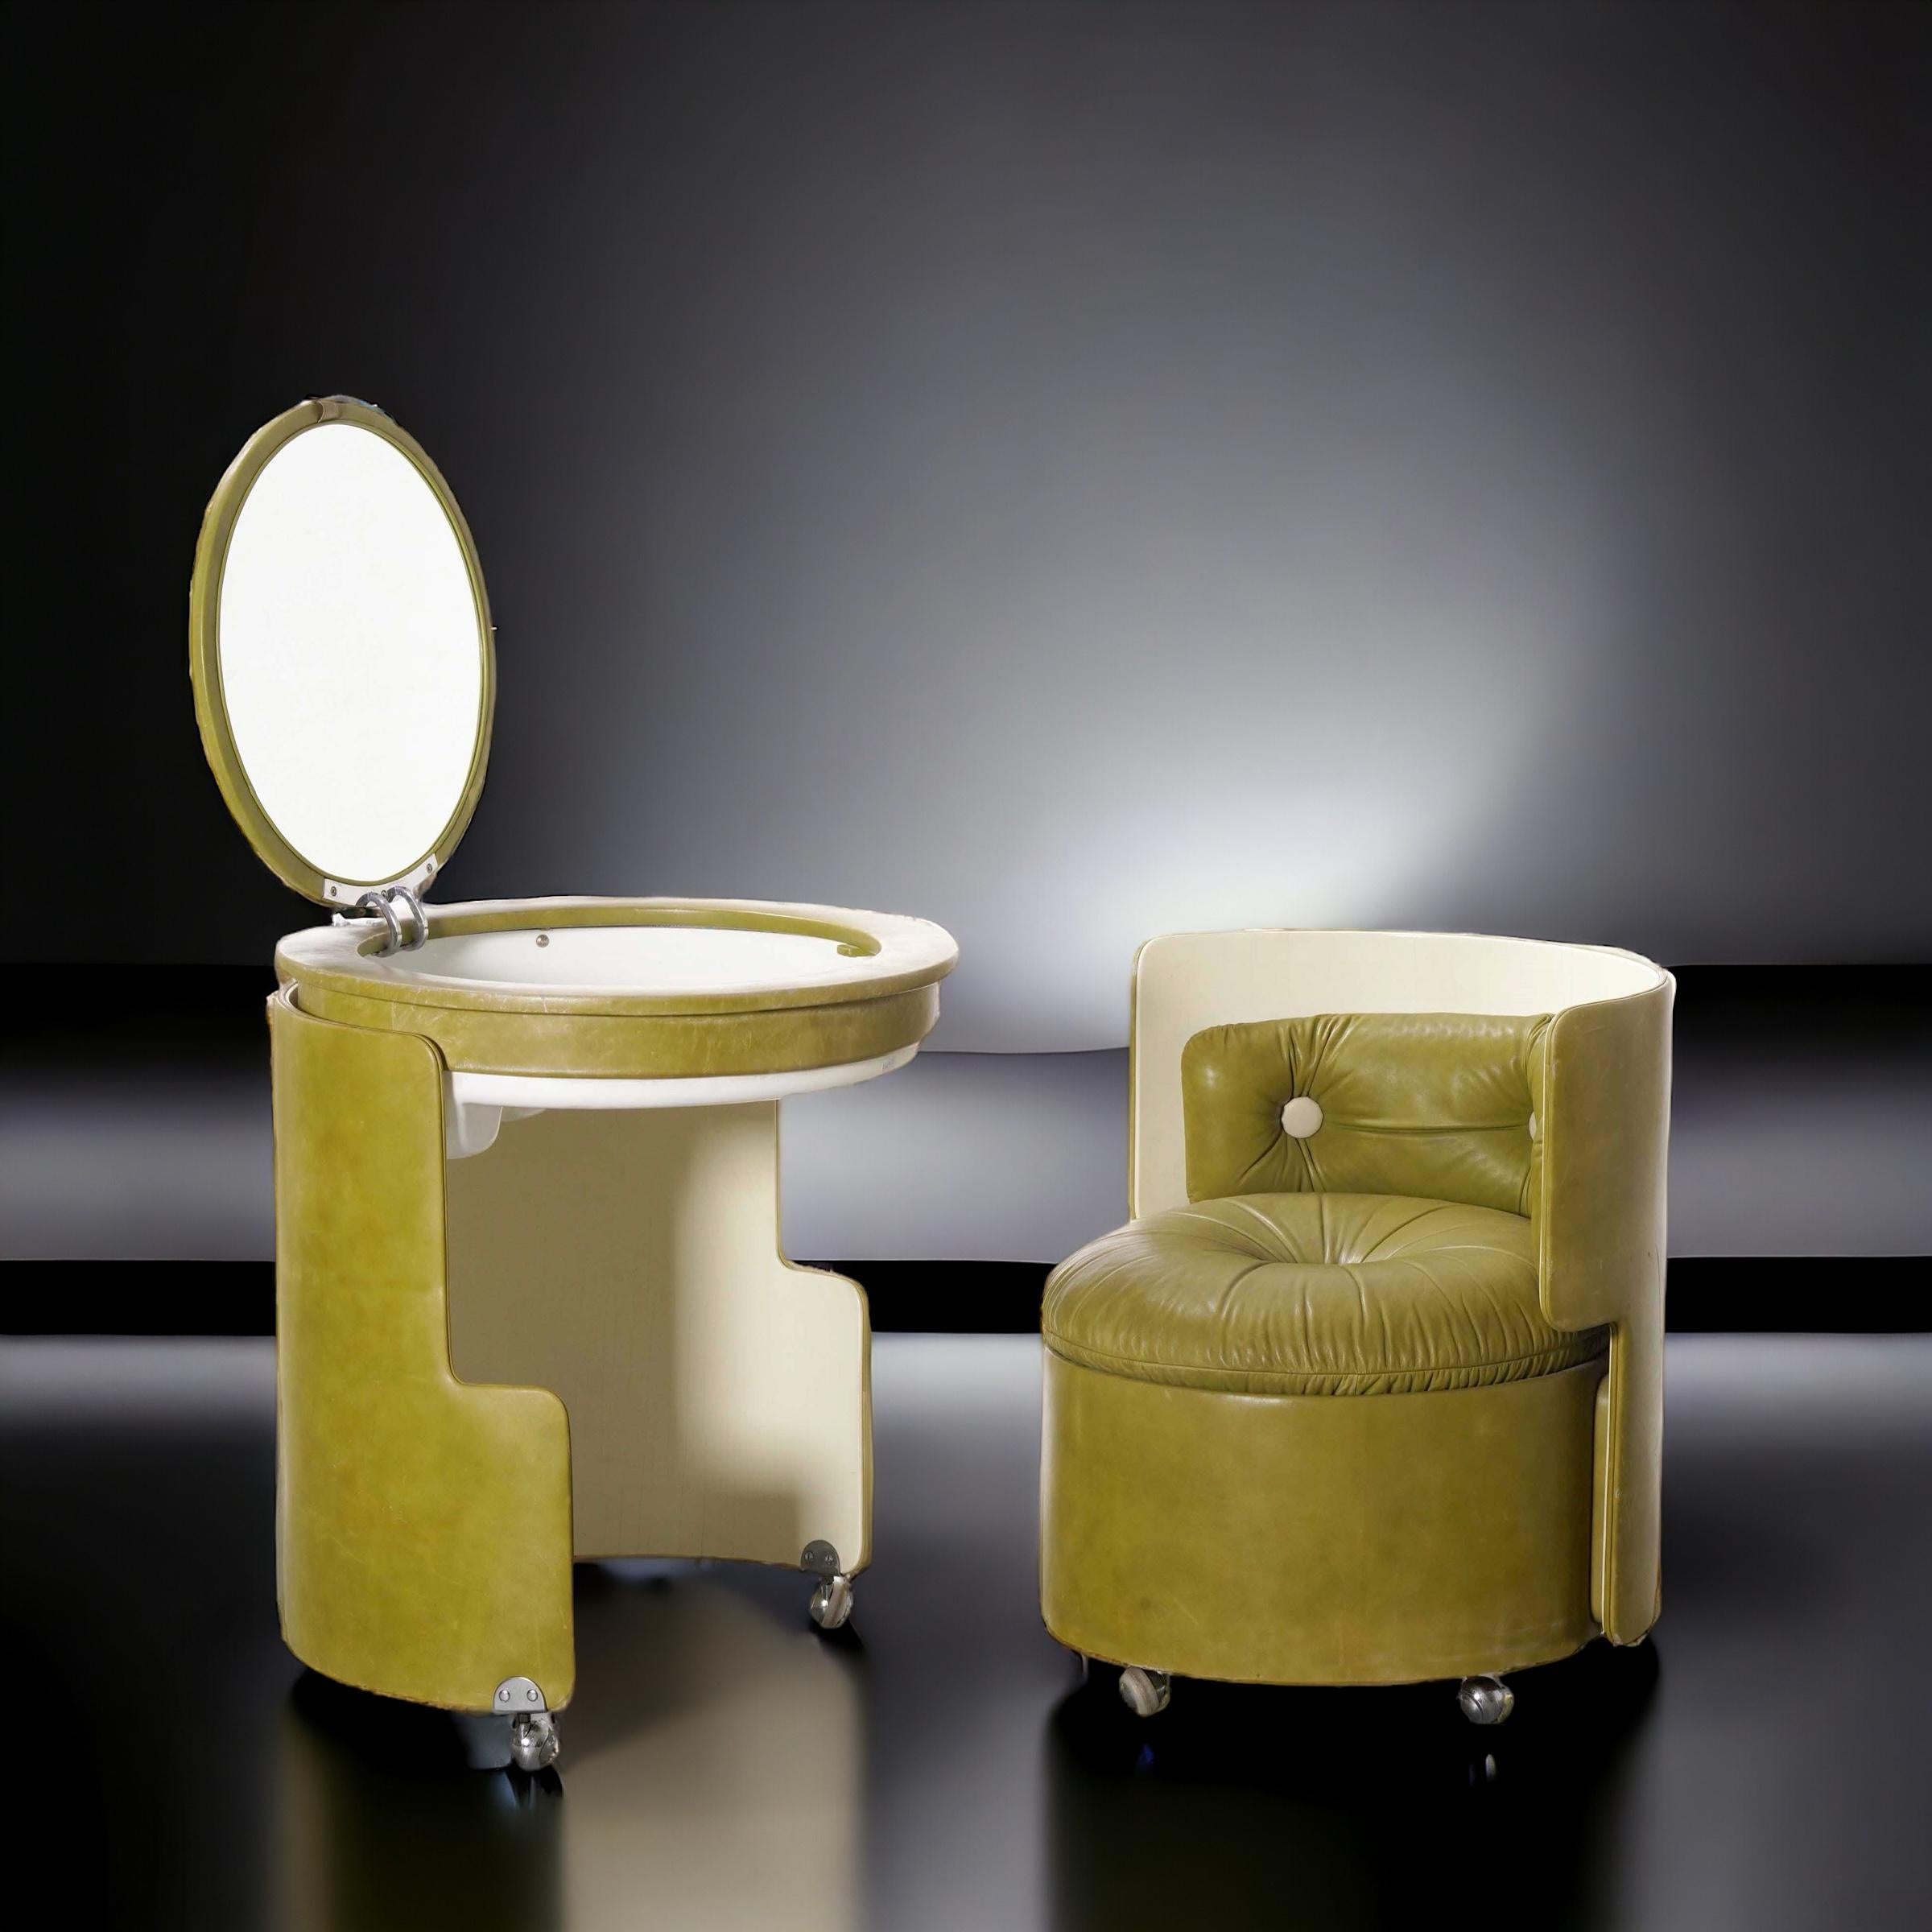  
Vanity Mod. Dilly Daily di Luigi Massoni per Poltrona Frau, 1968 ca. The dressing table is composed of two pieces, one round armchair (which alone measures 70 x 65 x 60 cm) and the table itself with space for accessories and a round mirror. It has